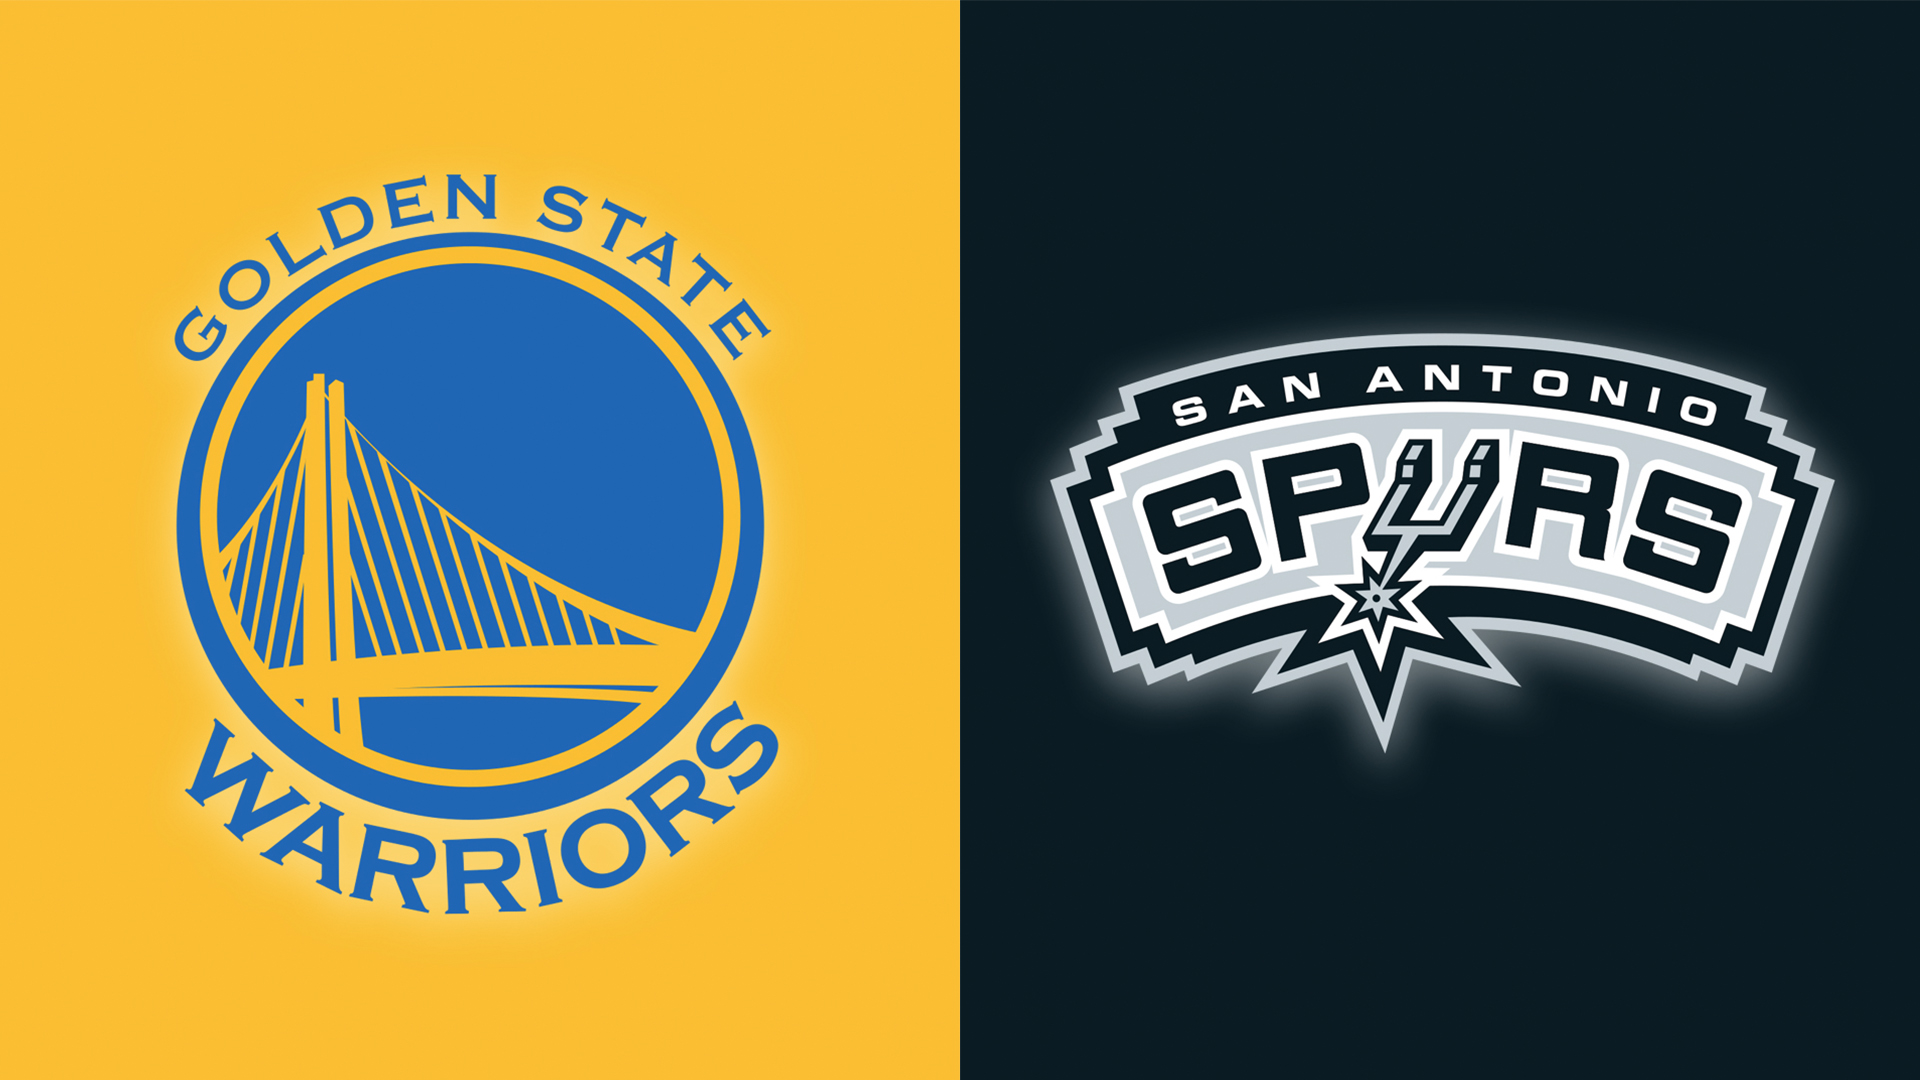 Preview 02/11/19 The Spurs visit the banged up Warriors BALLERS.PH